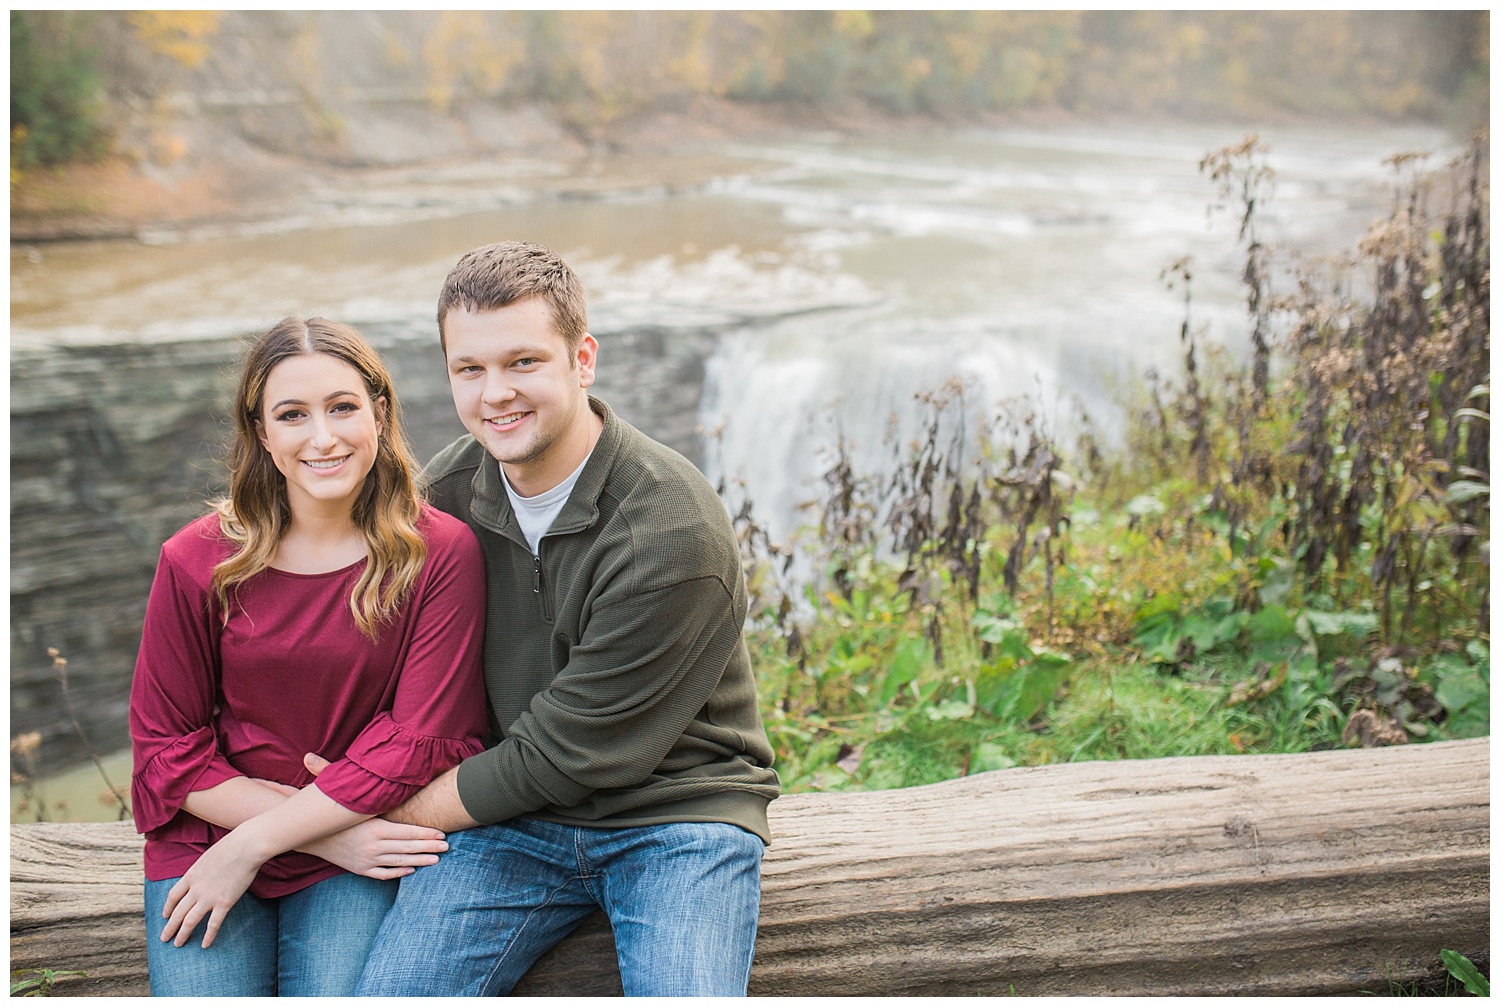 Couples session - Letchworth state park - Lass & Beau -173_Buffalo wedding photography.jpg